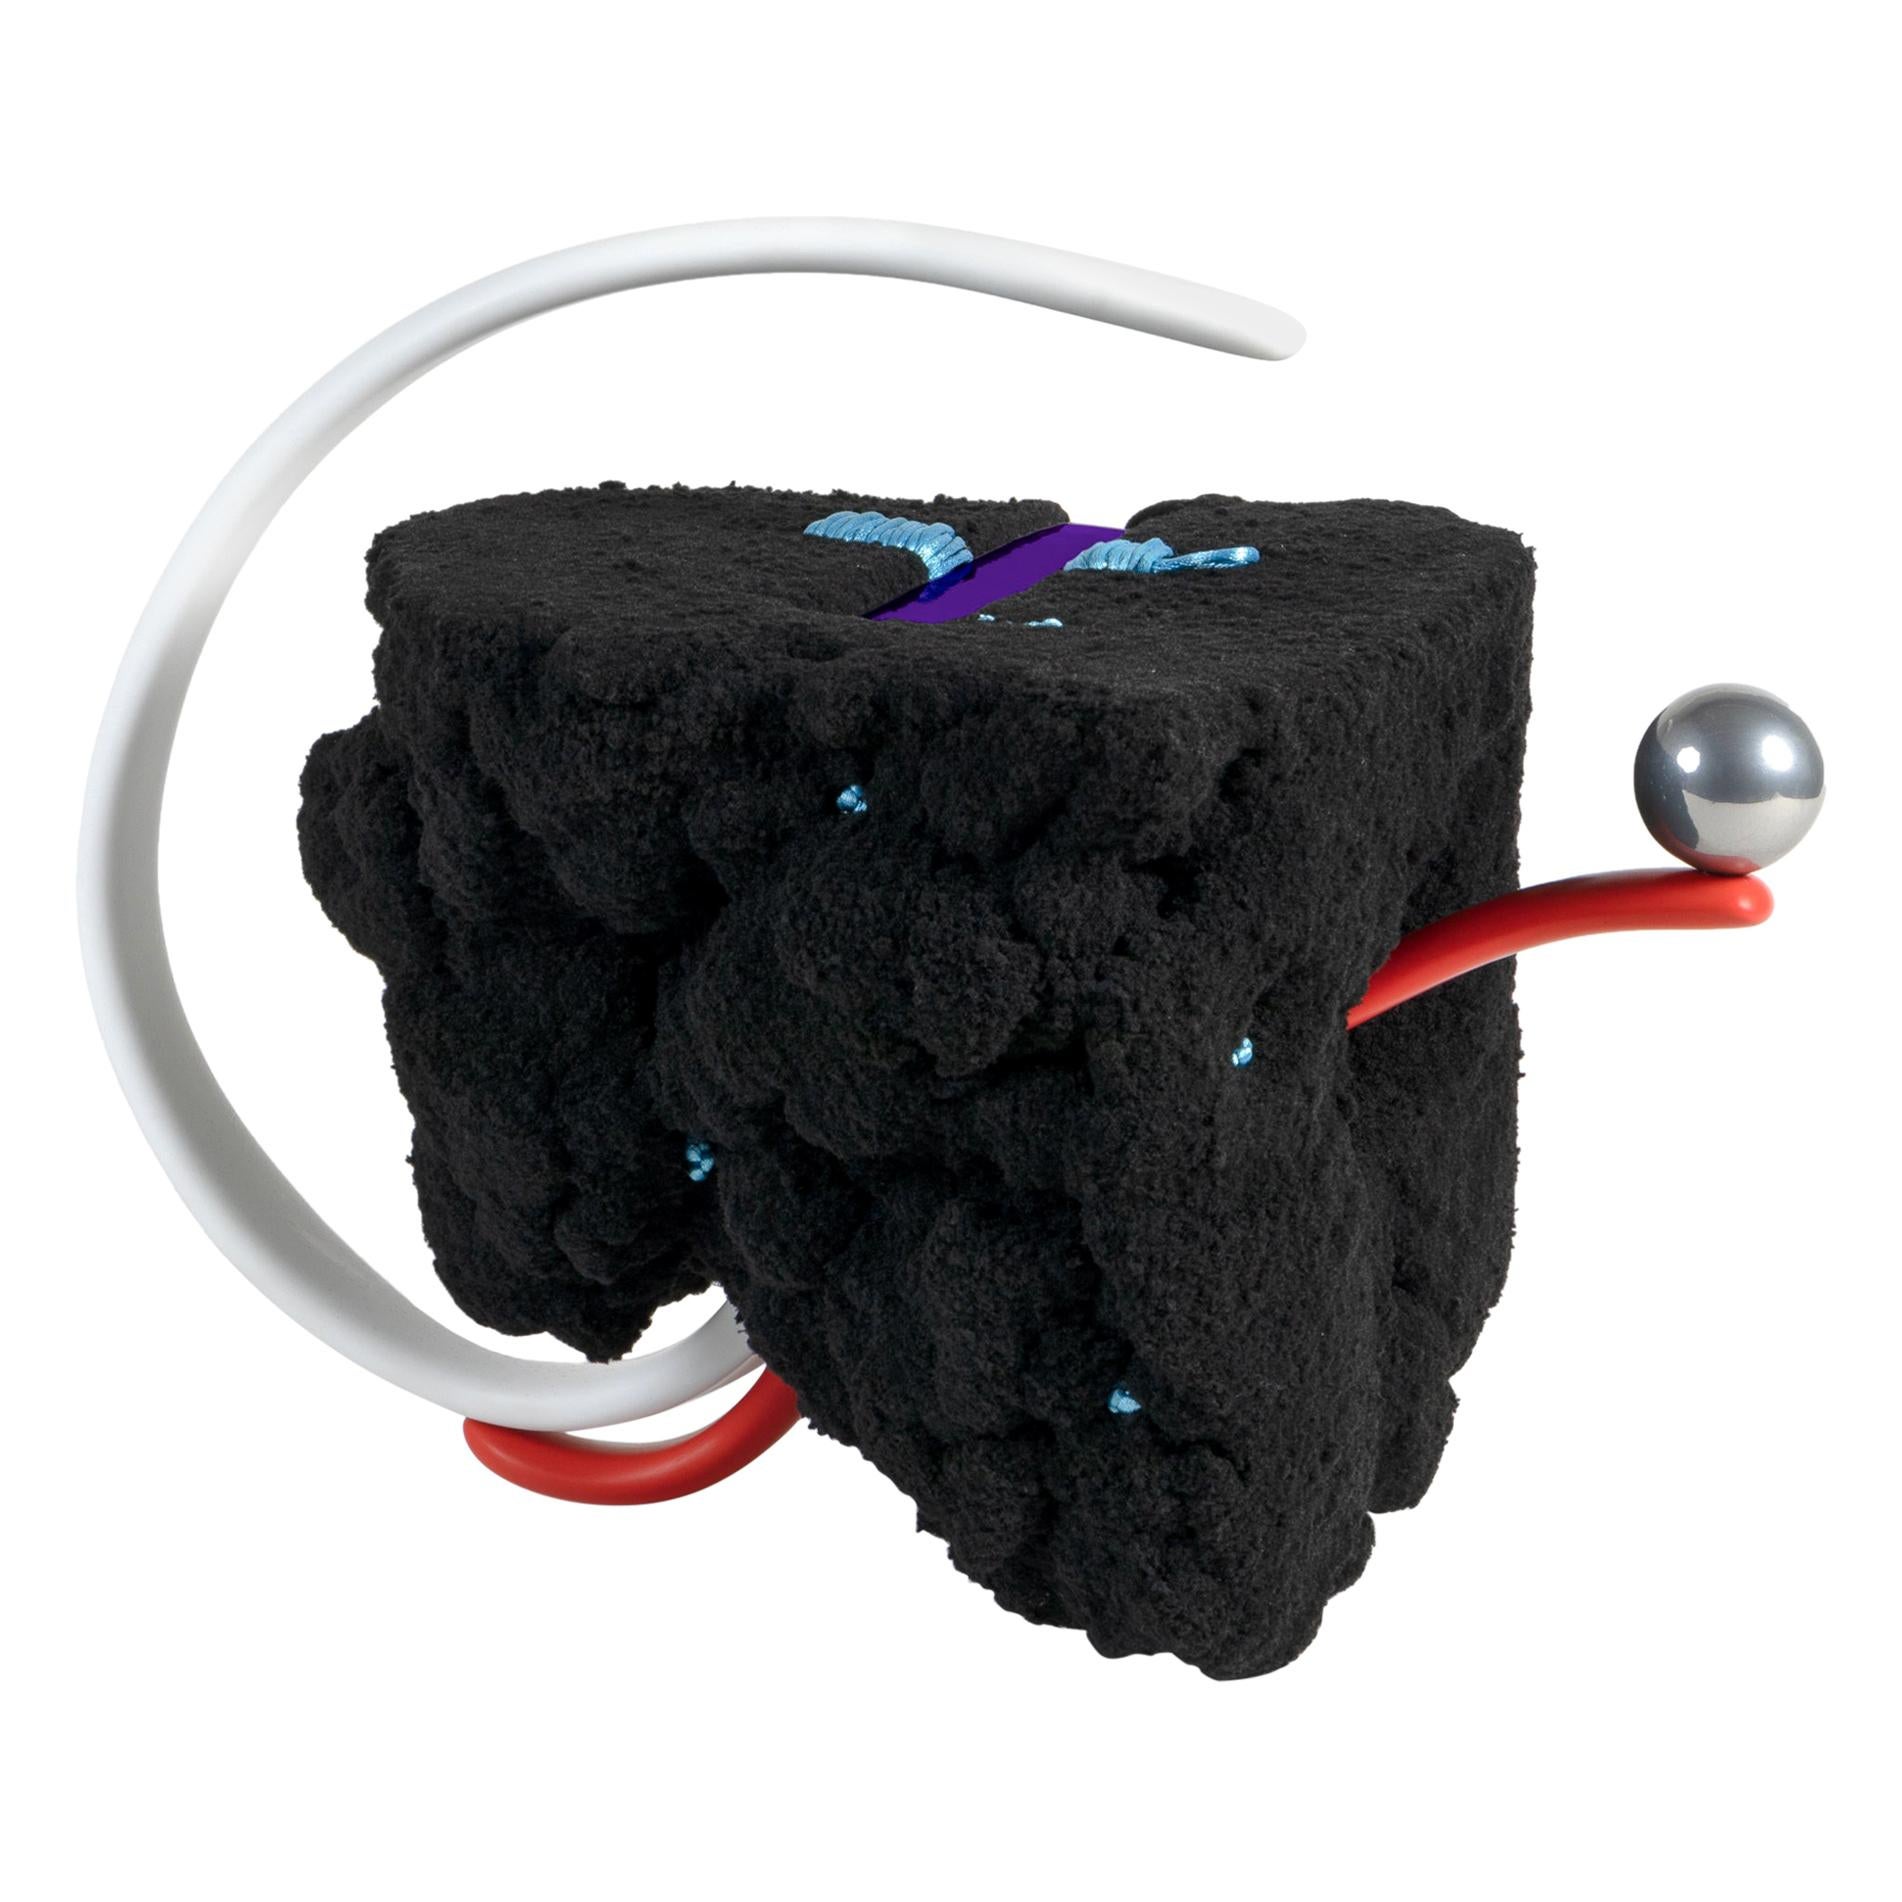 "Soft Rock (Black)", Designed and Made by John Souter